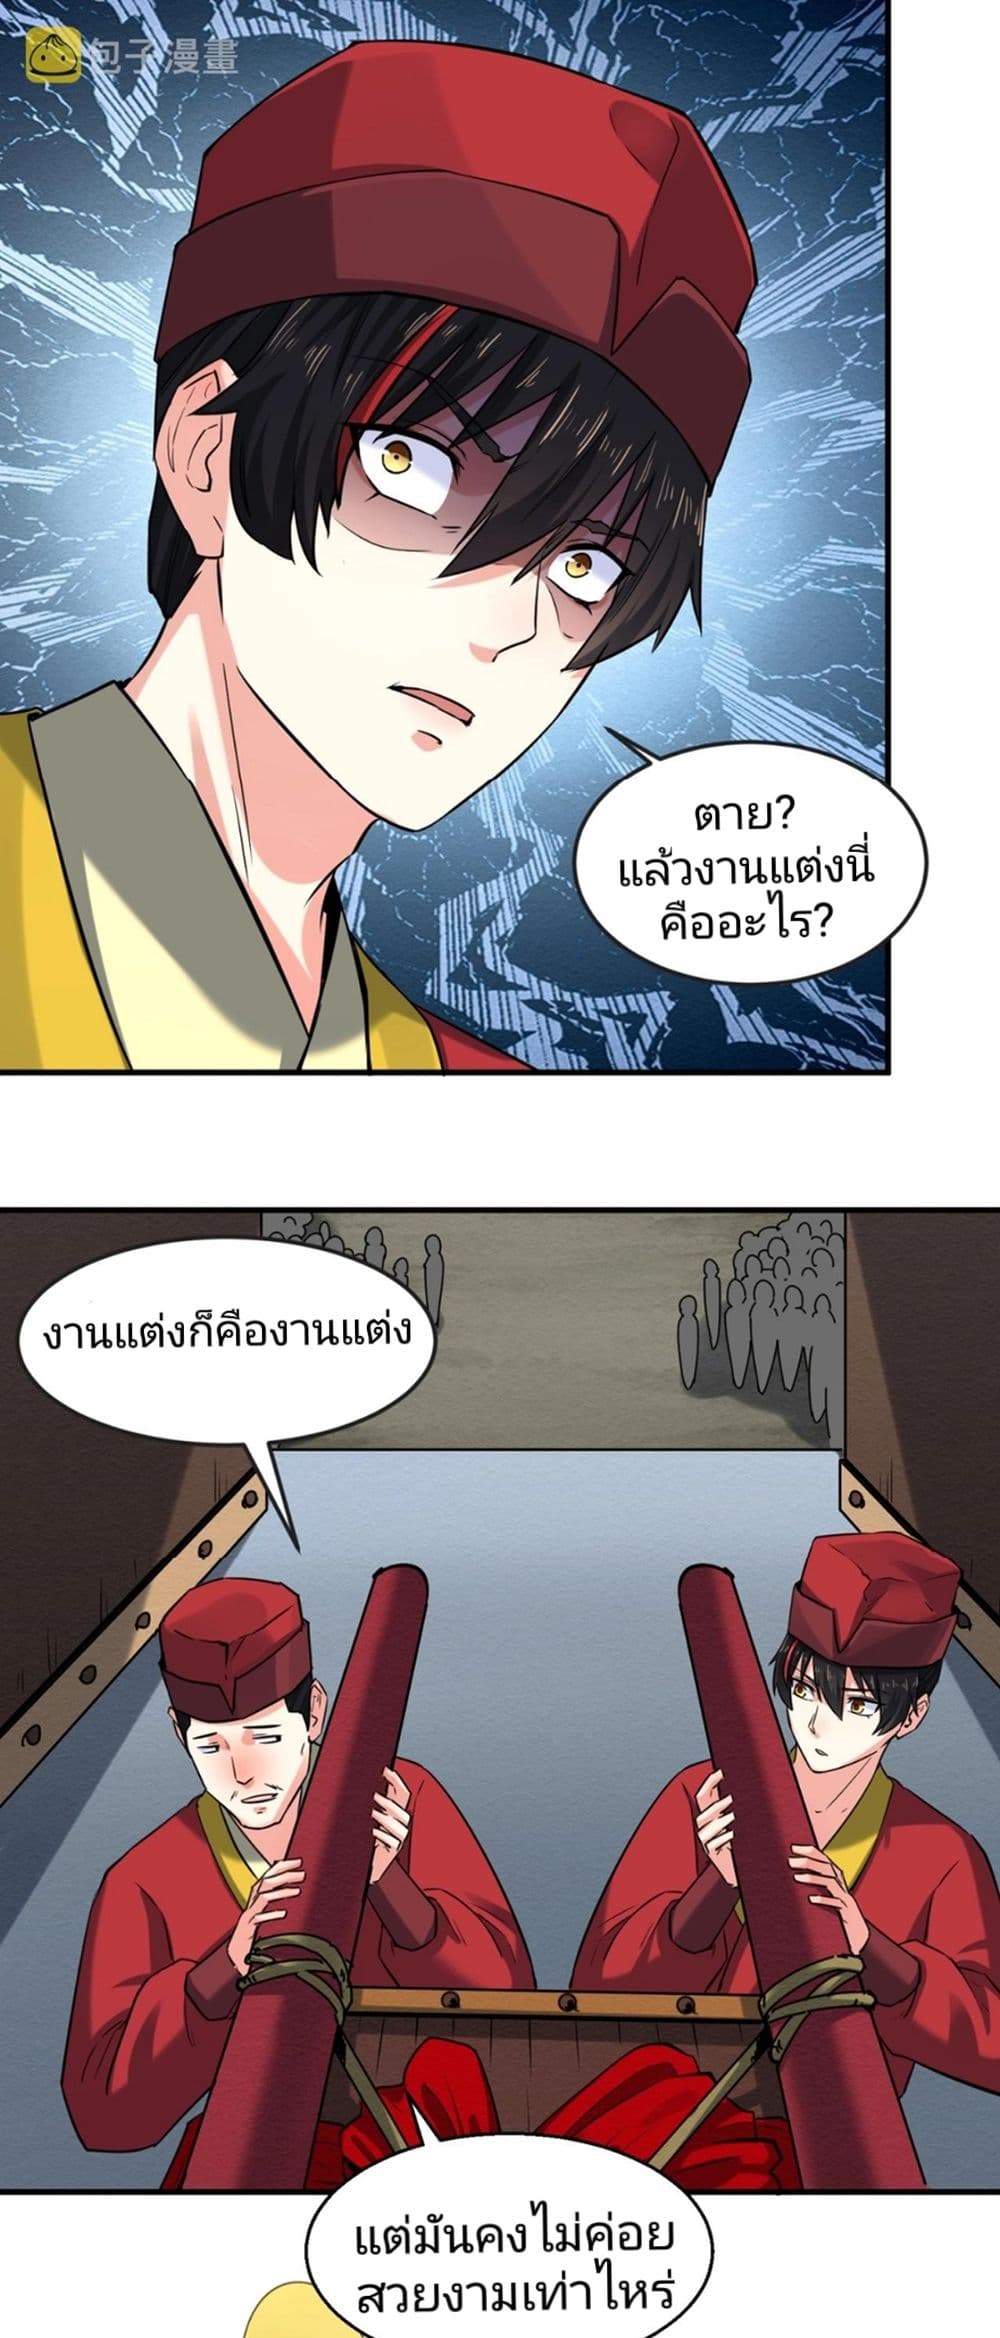 The Age of Ghost Spirits à¸à¸­à¸à¸à¸µà¹ 14 (44)